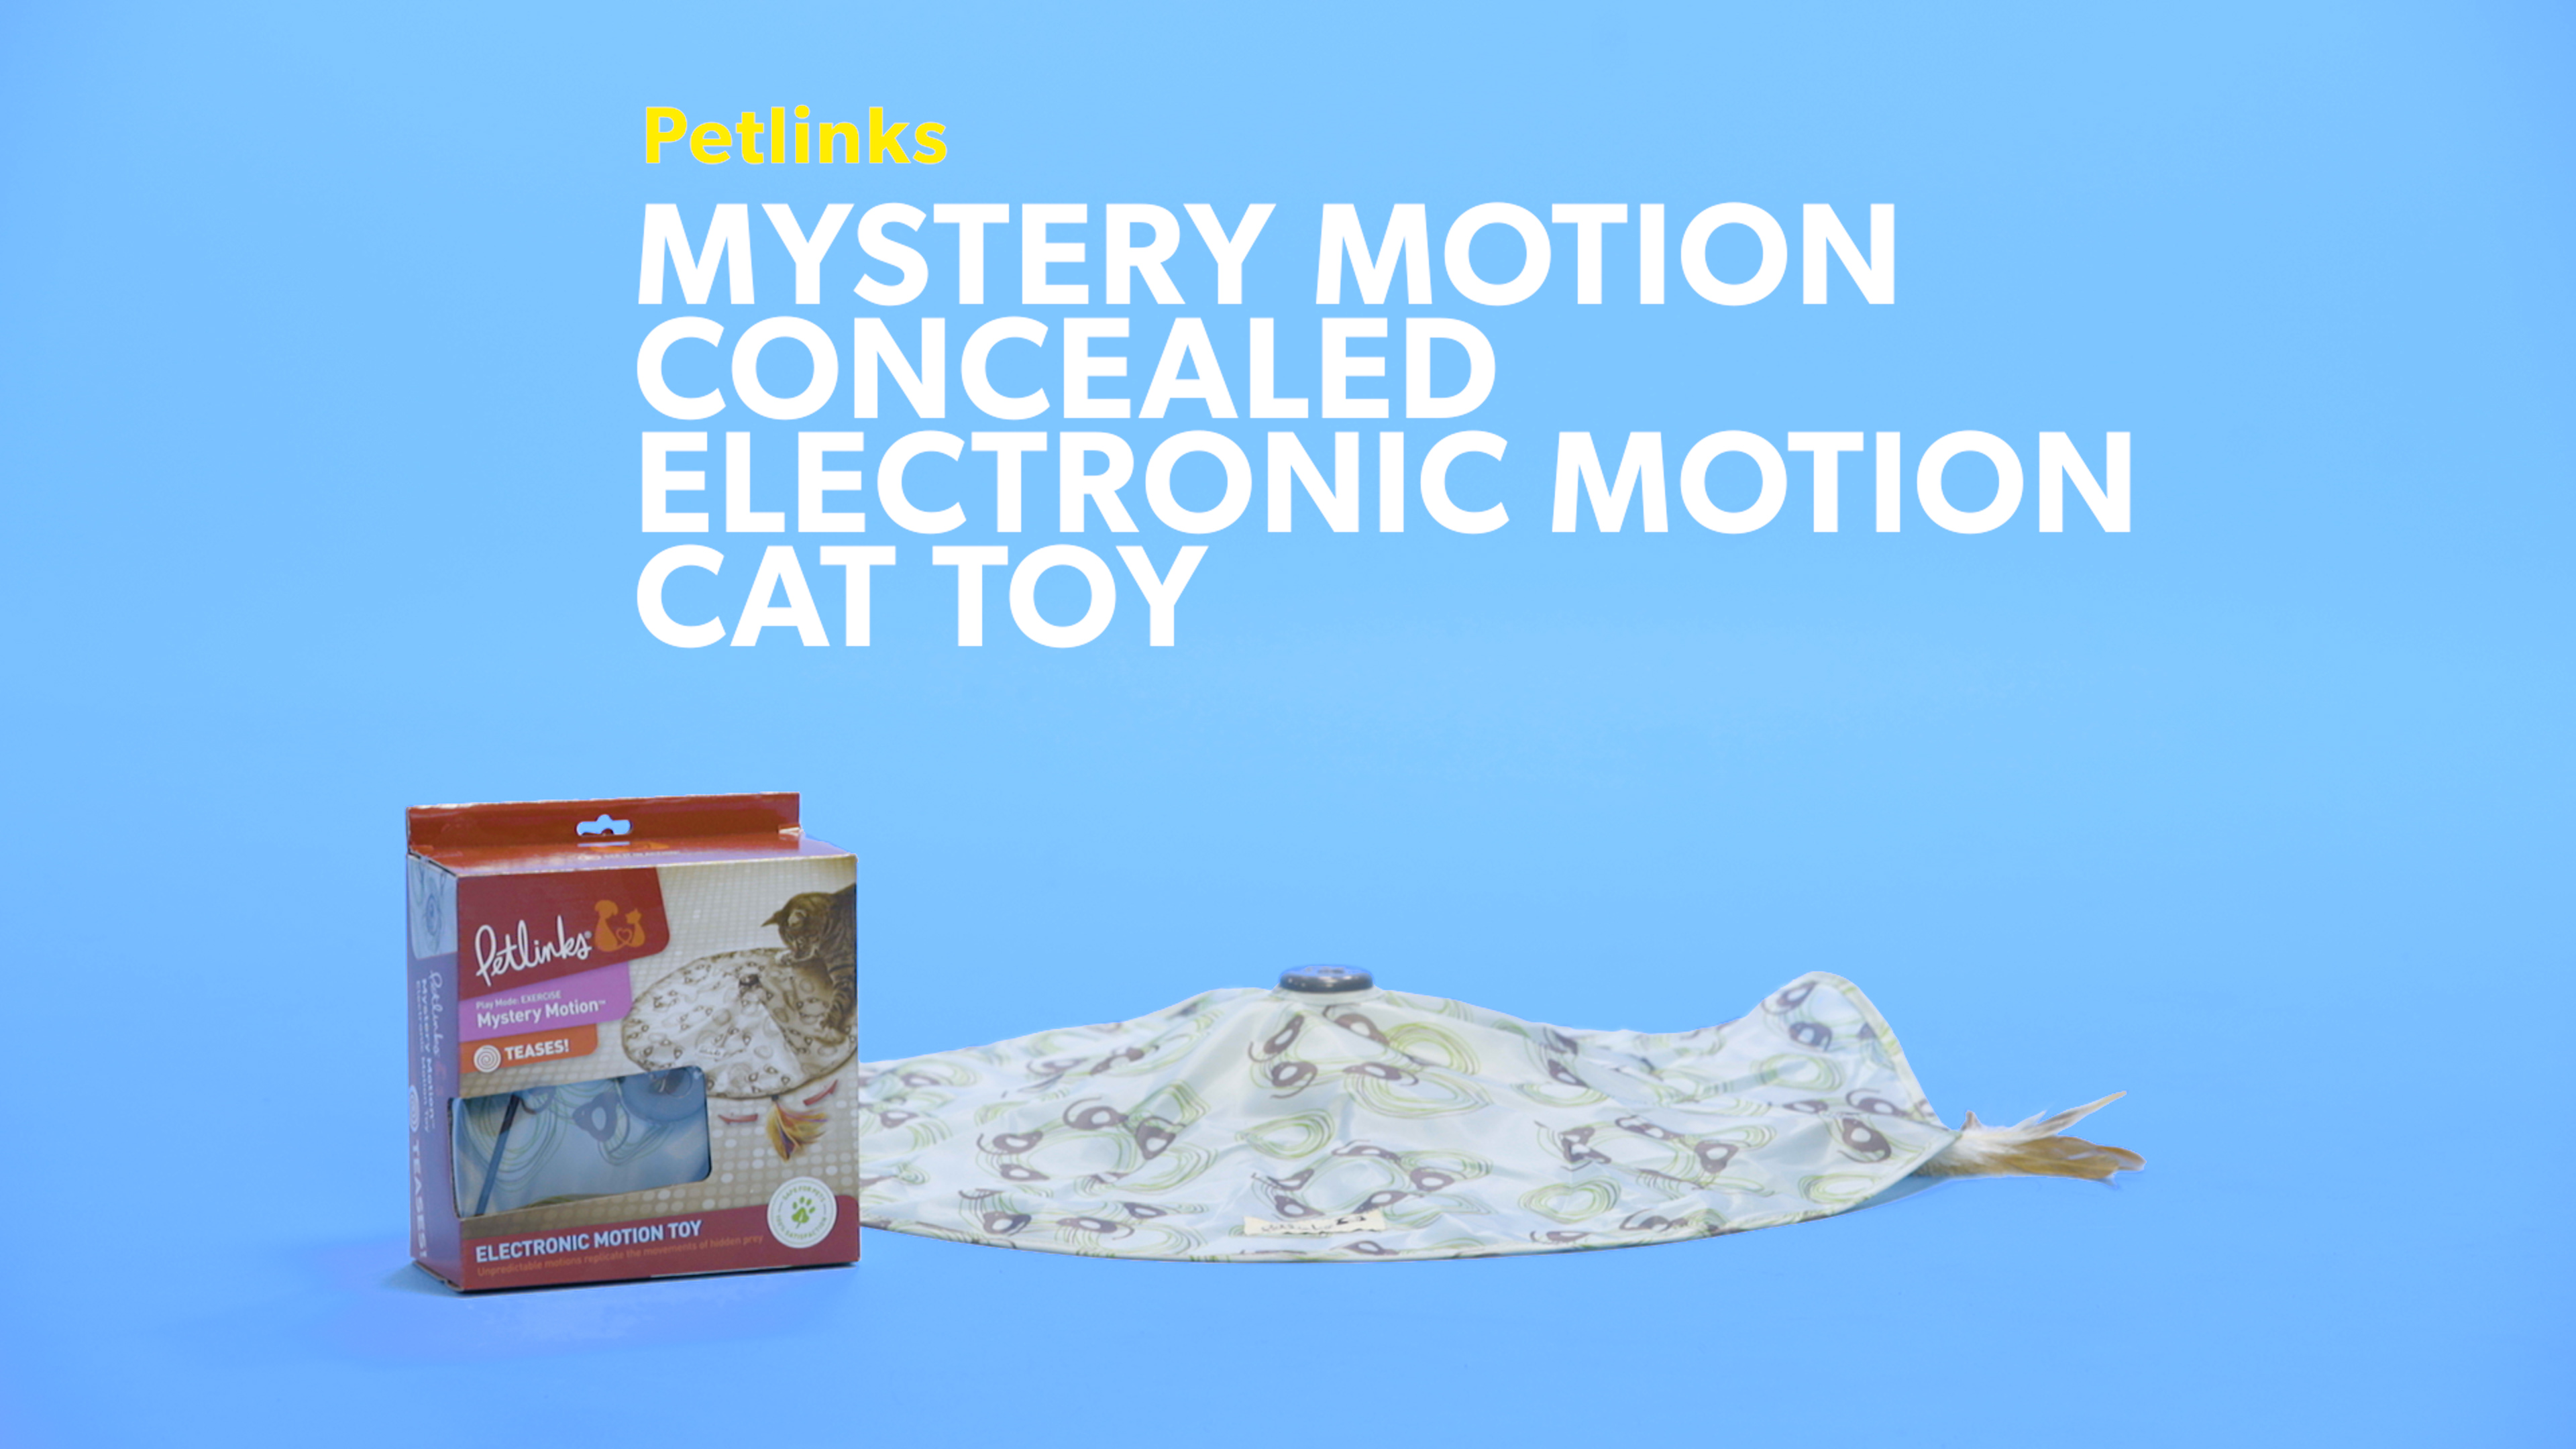 petlinks mystery motion replacement parts